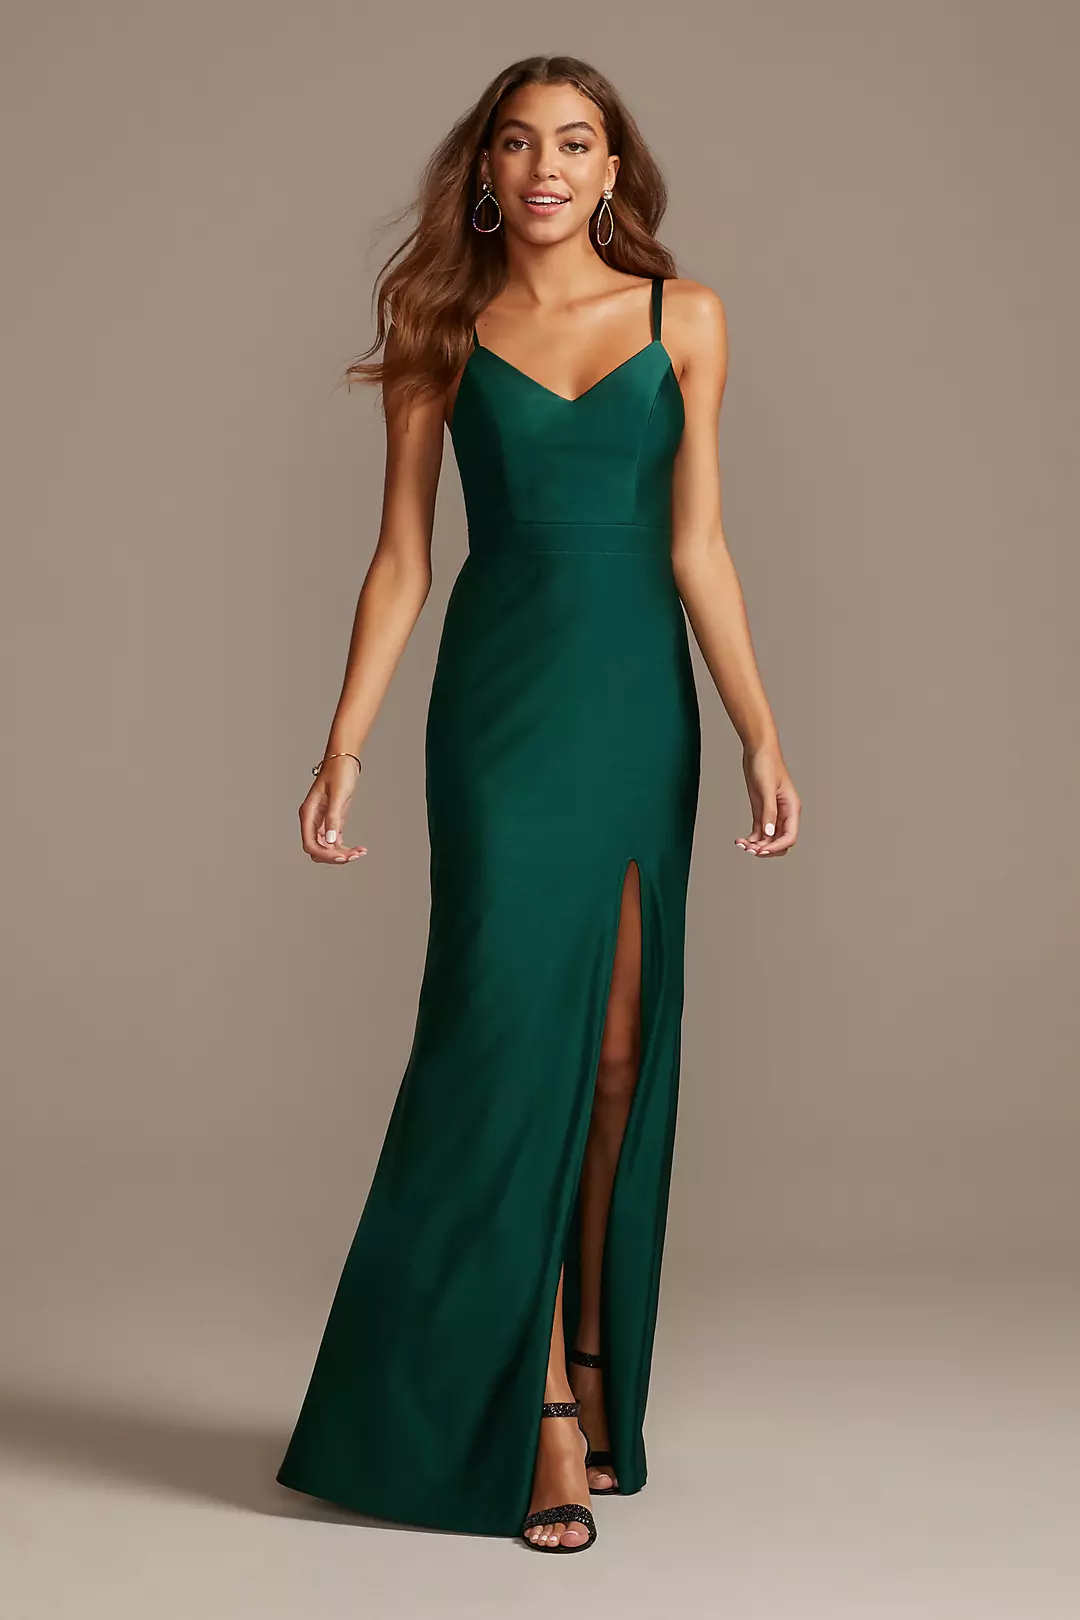 Double Strap Slip Dress with Lacy Back and Slit Image